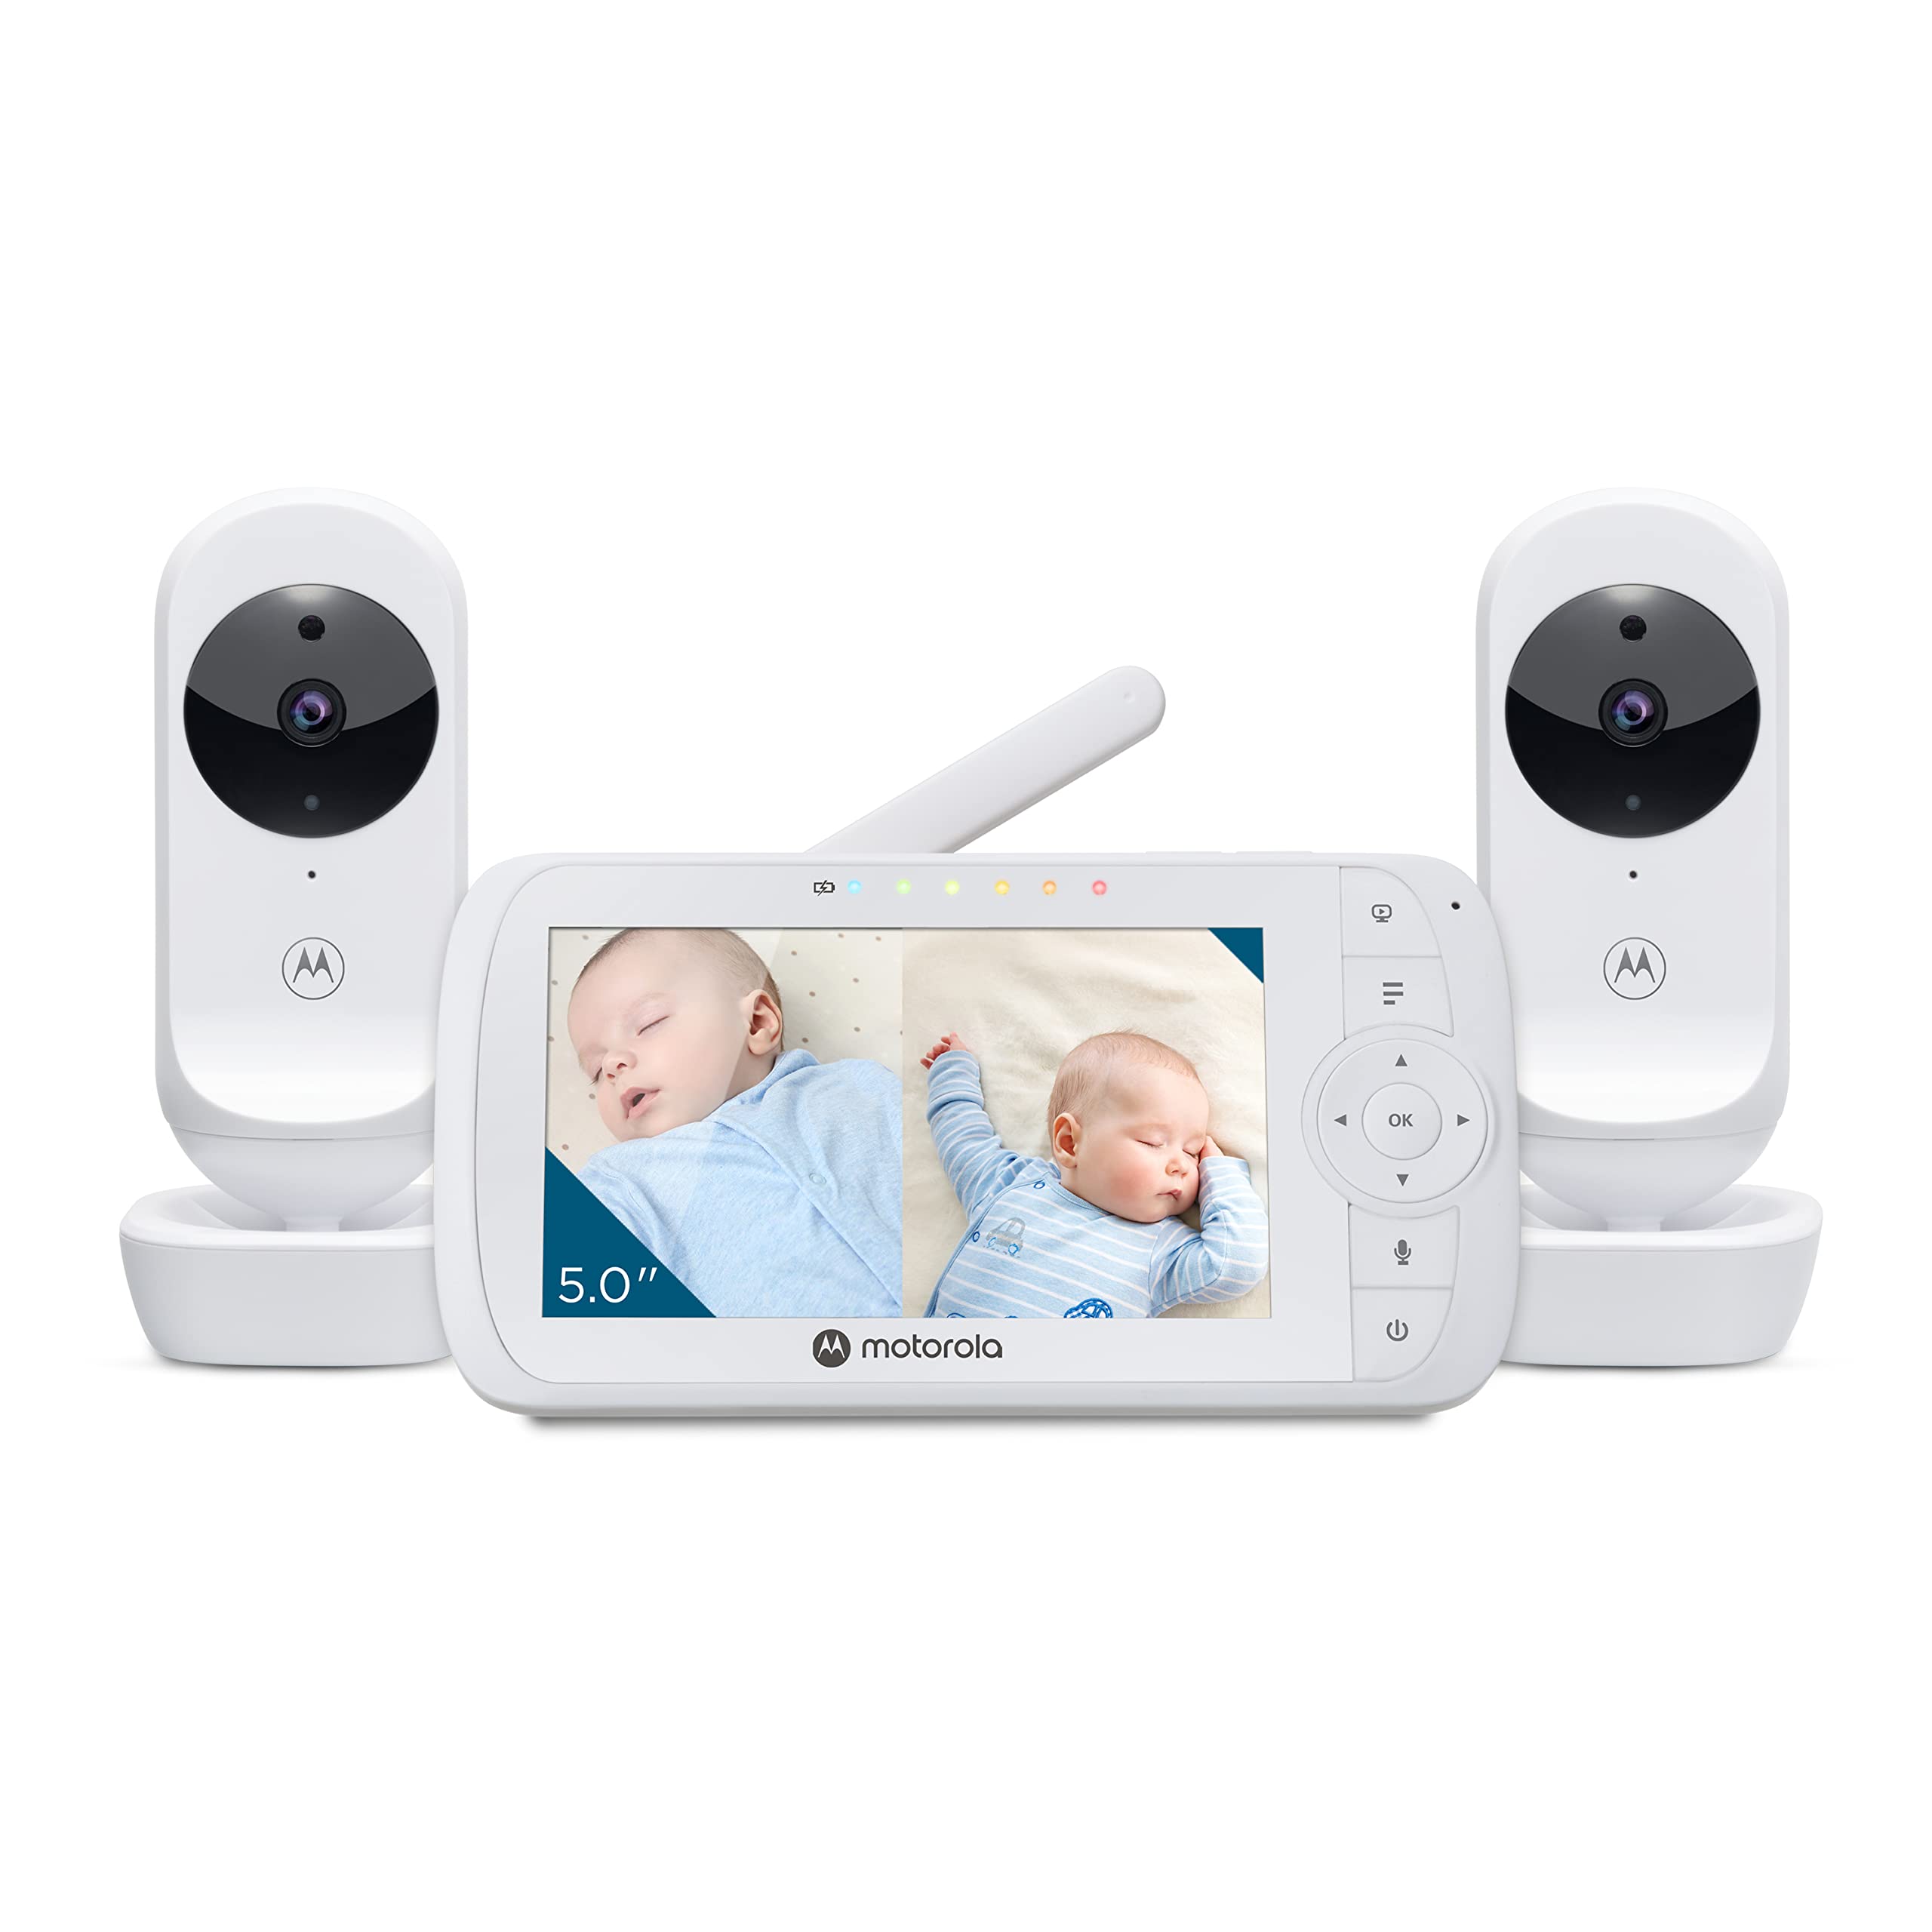 Motorola VM35-2 / Ease 35 Twin Baby Monitor with 2 Cameras 5.0 Inch Video Baby Monitor HD Display Split Screen Display Night Vision TwoWay Communication Lullabies Zoom Room Temperature, White